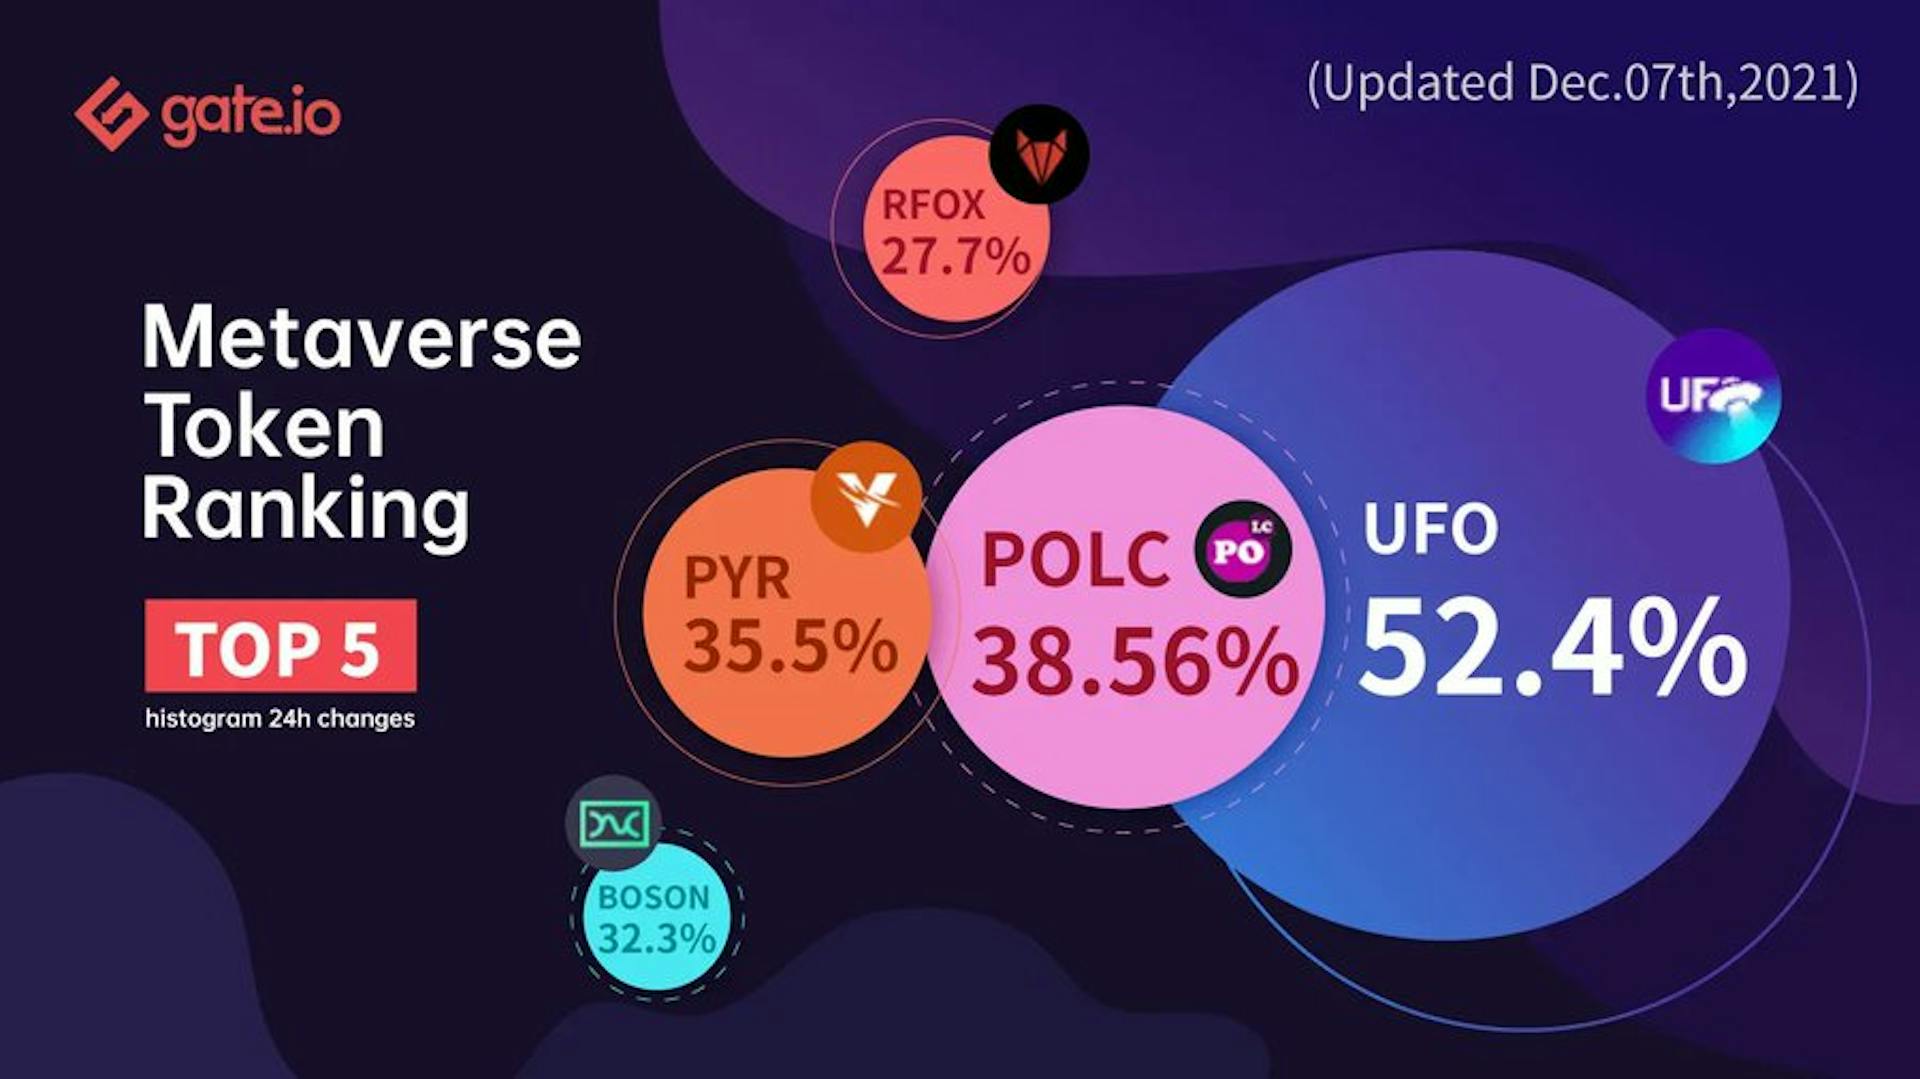 Yes, the top-ranked Metaverse token is called UFO.